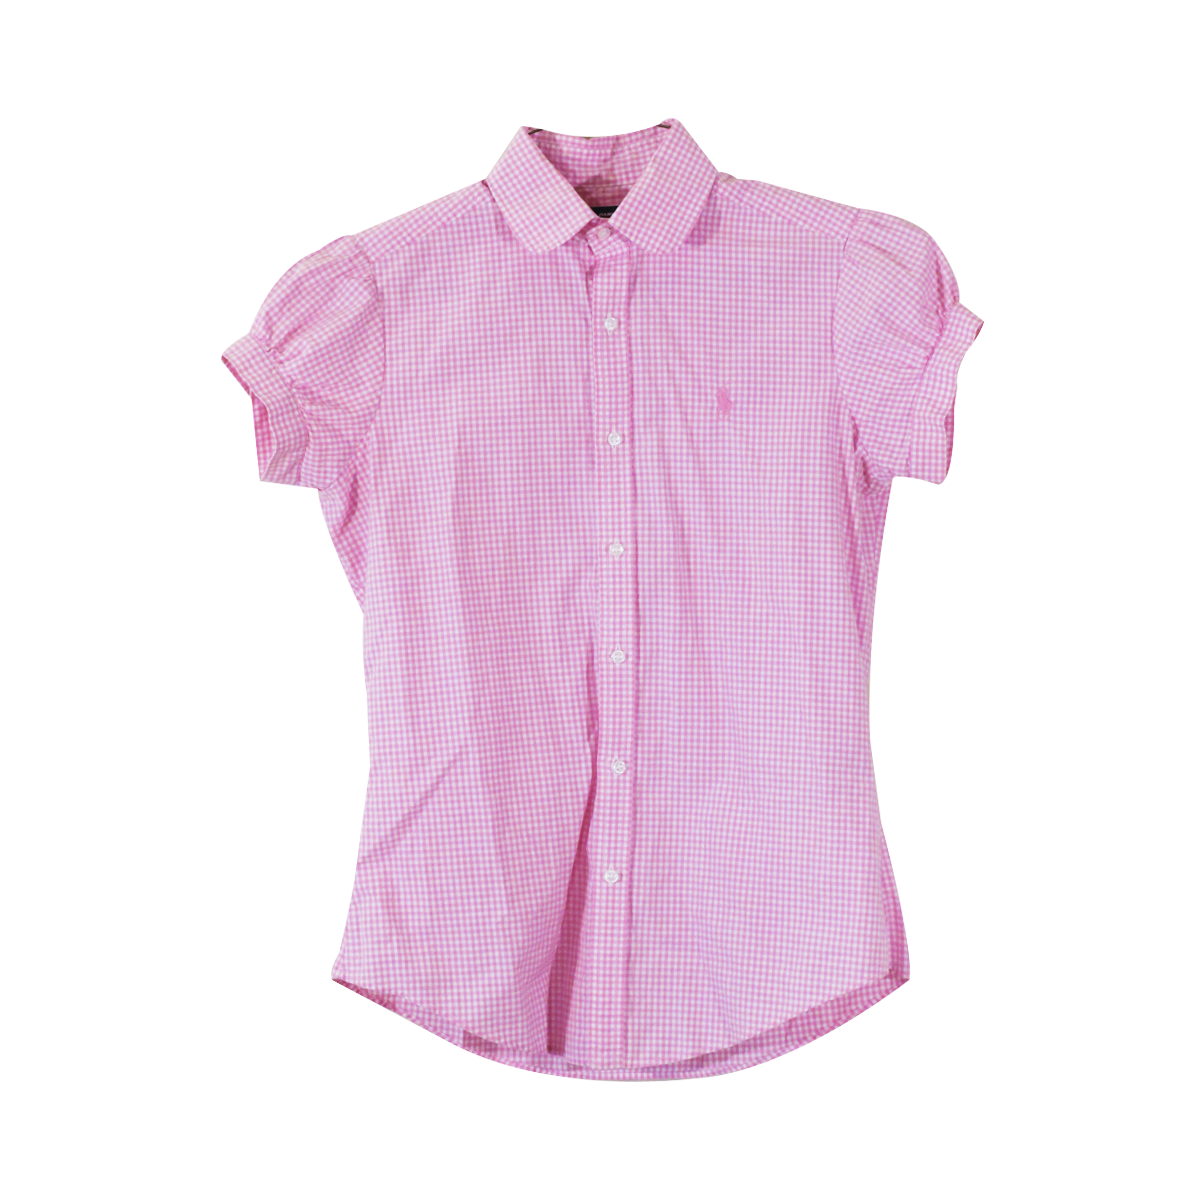 Pink Polo Ralph Lauren Gingham Shirt – The Camp Site